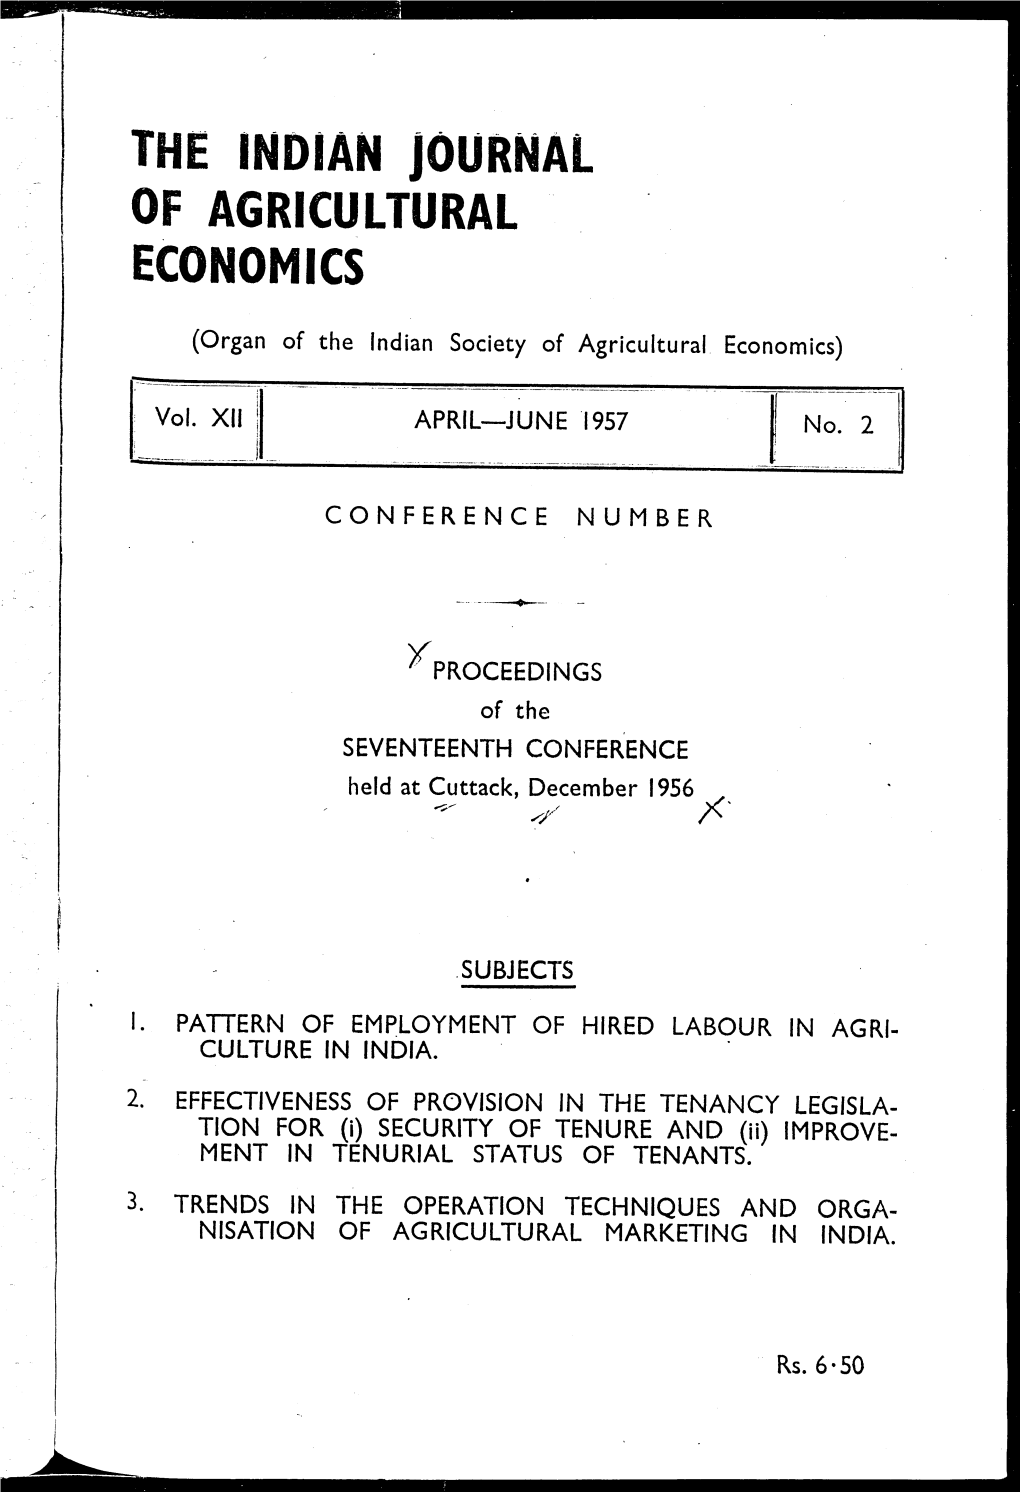 The Indian Journal of Agricultural Economics